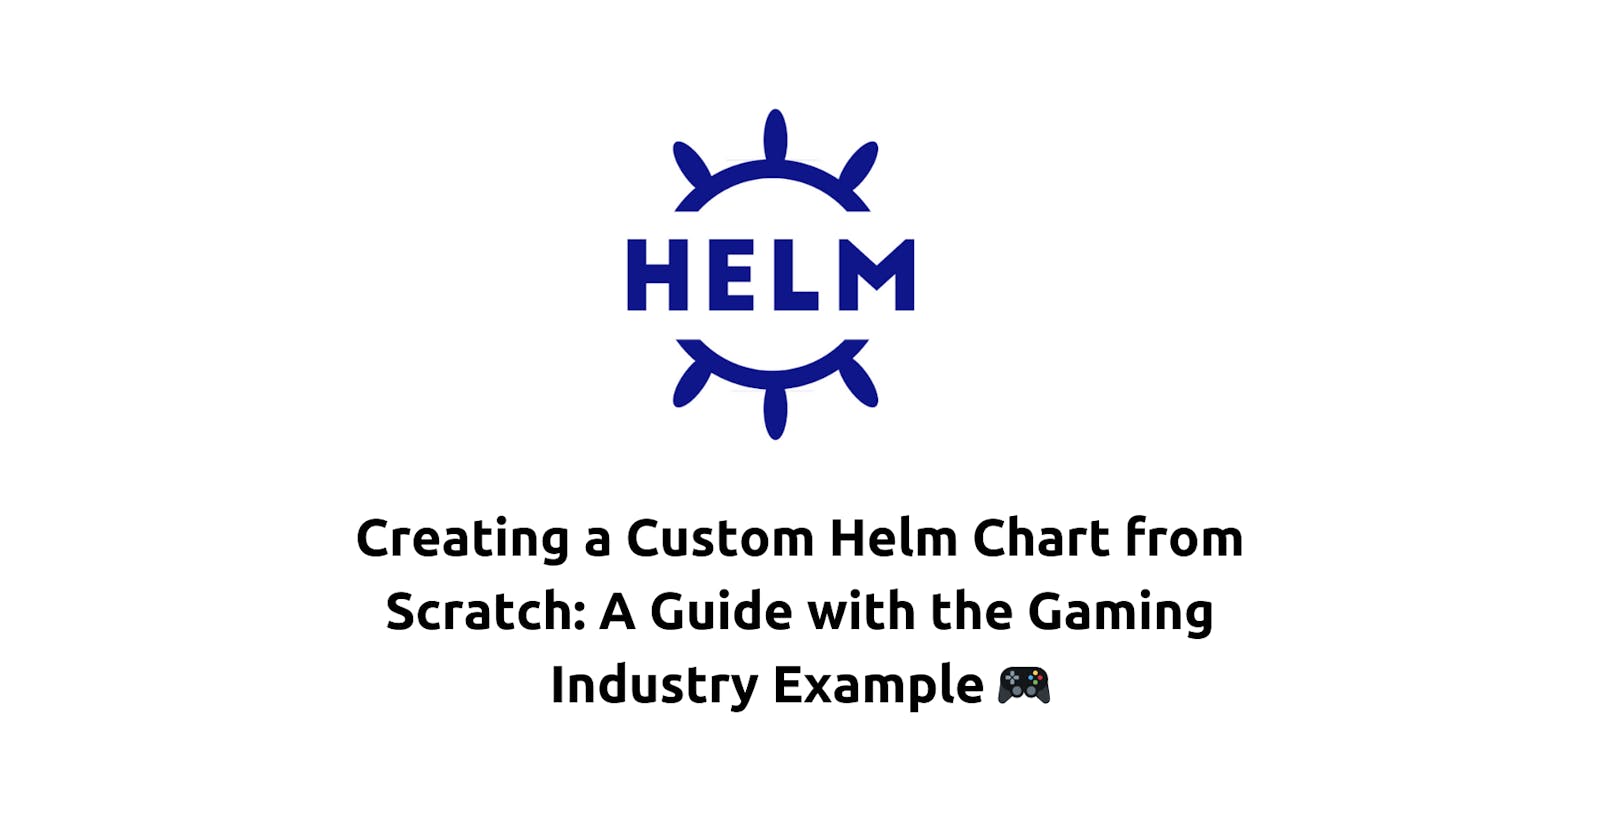 Creating a Custom Helm Chart from Scratch: A Guide with the Gaming Industry Example 🎮